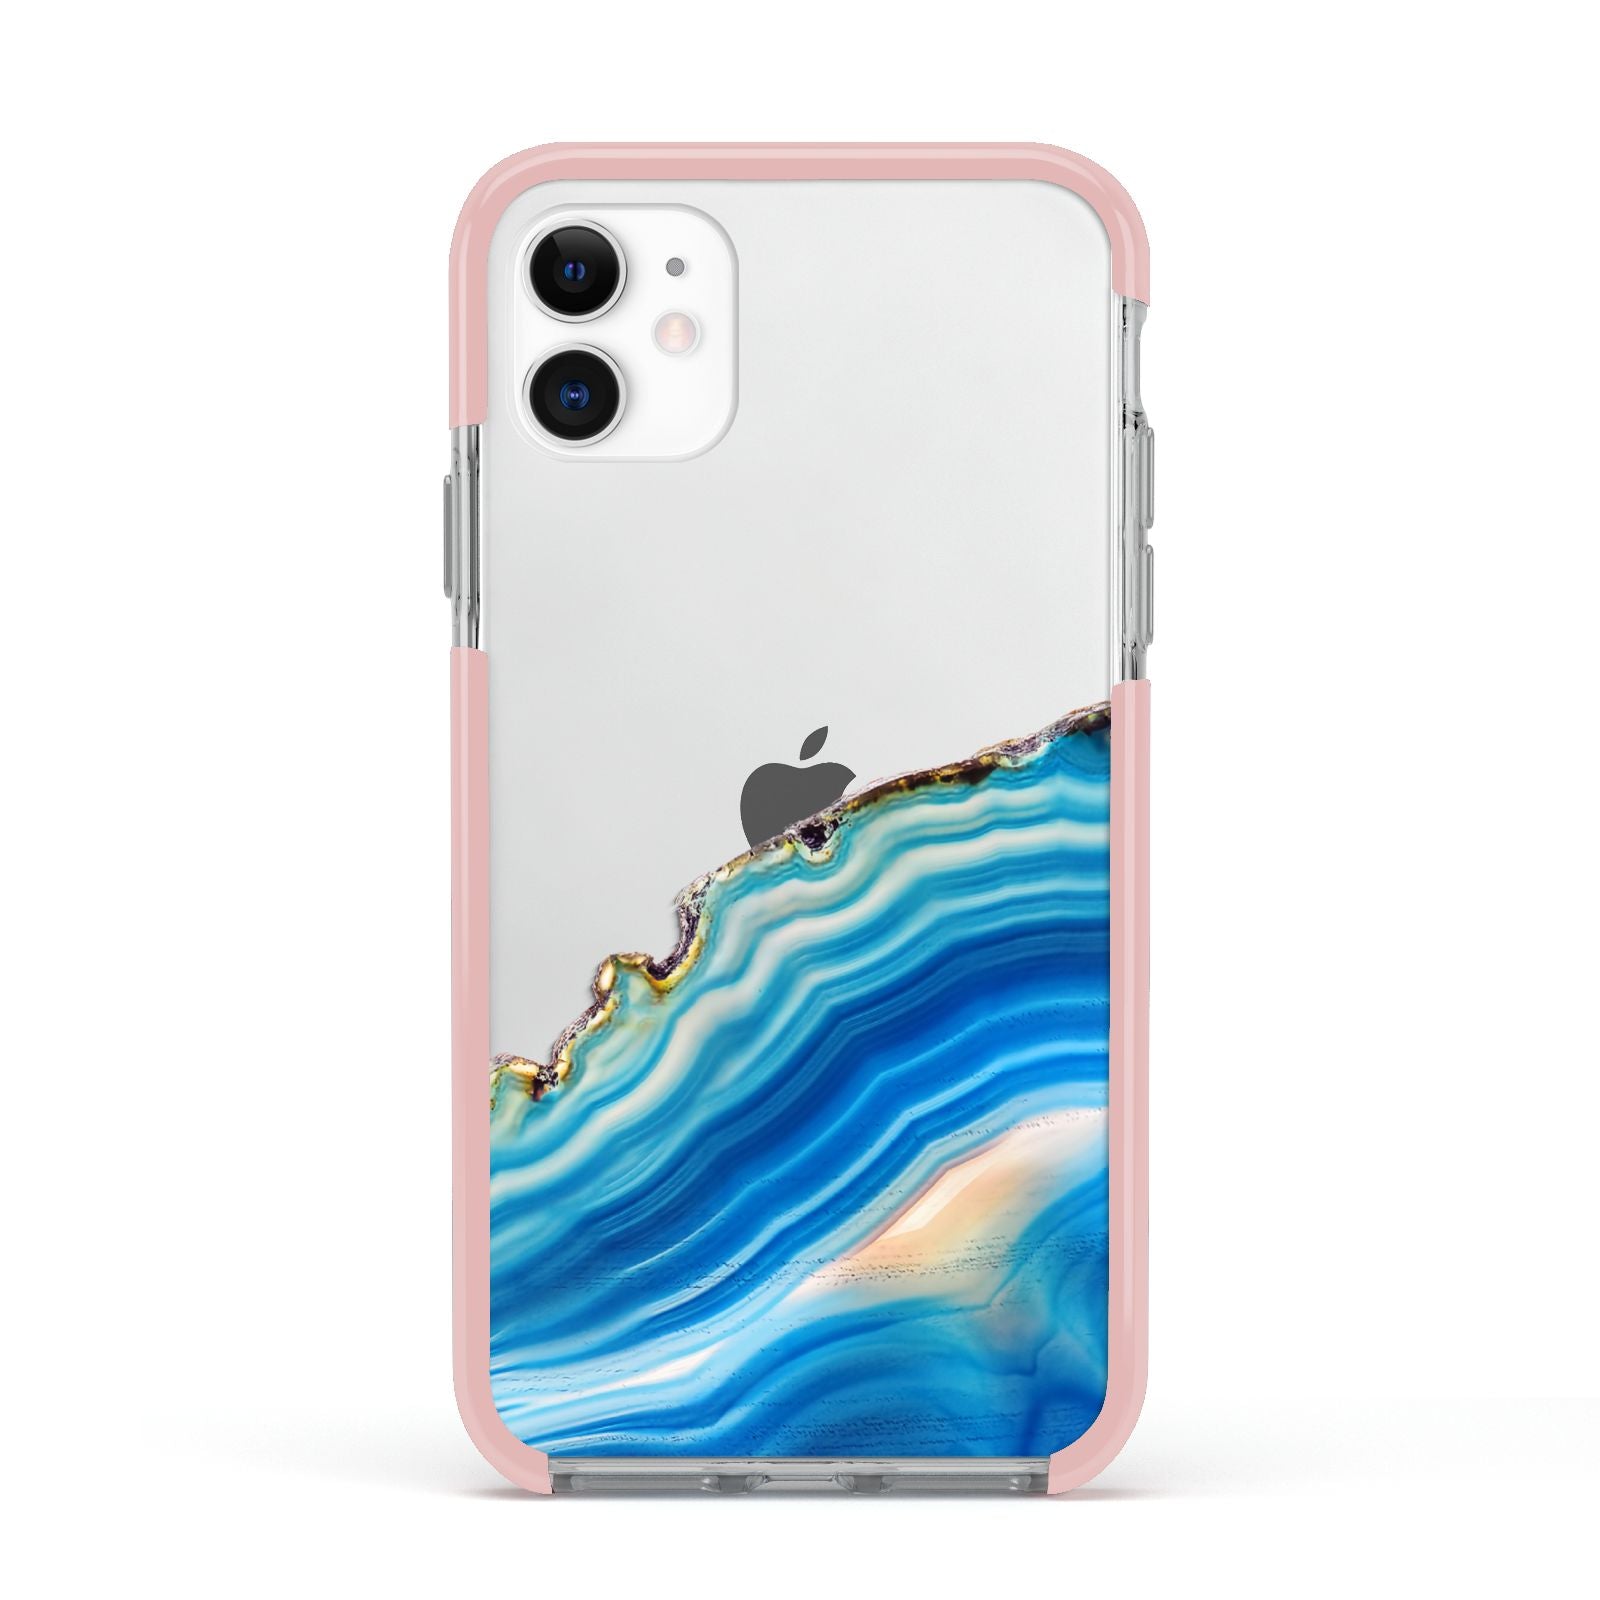 Agate Pale Blue and Bright Blue Apple iPhone 11 in White with Pink Impact Case